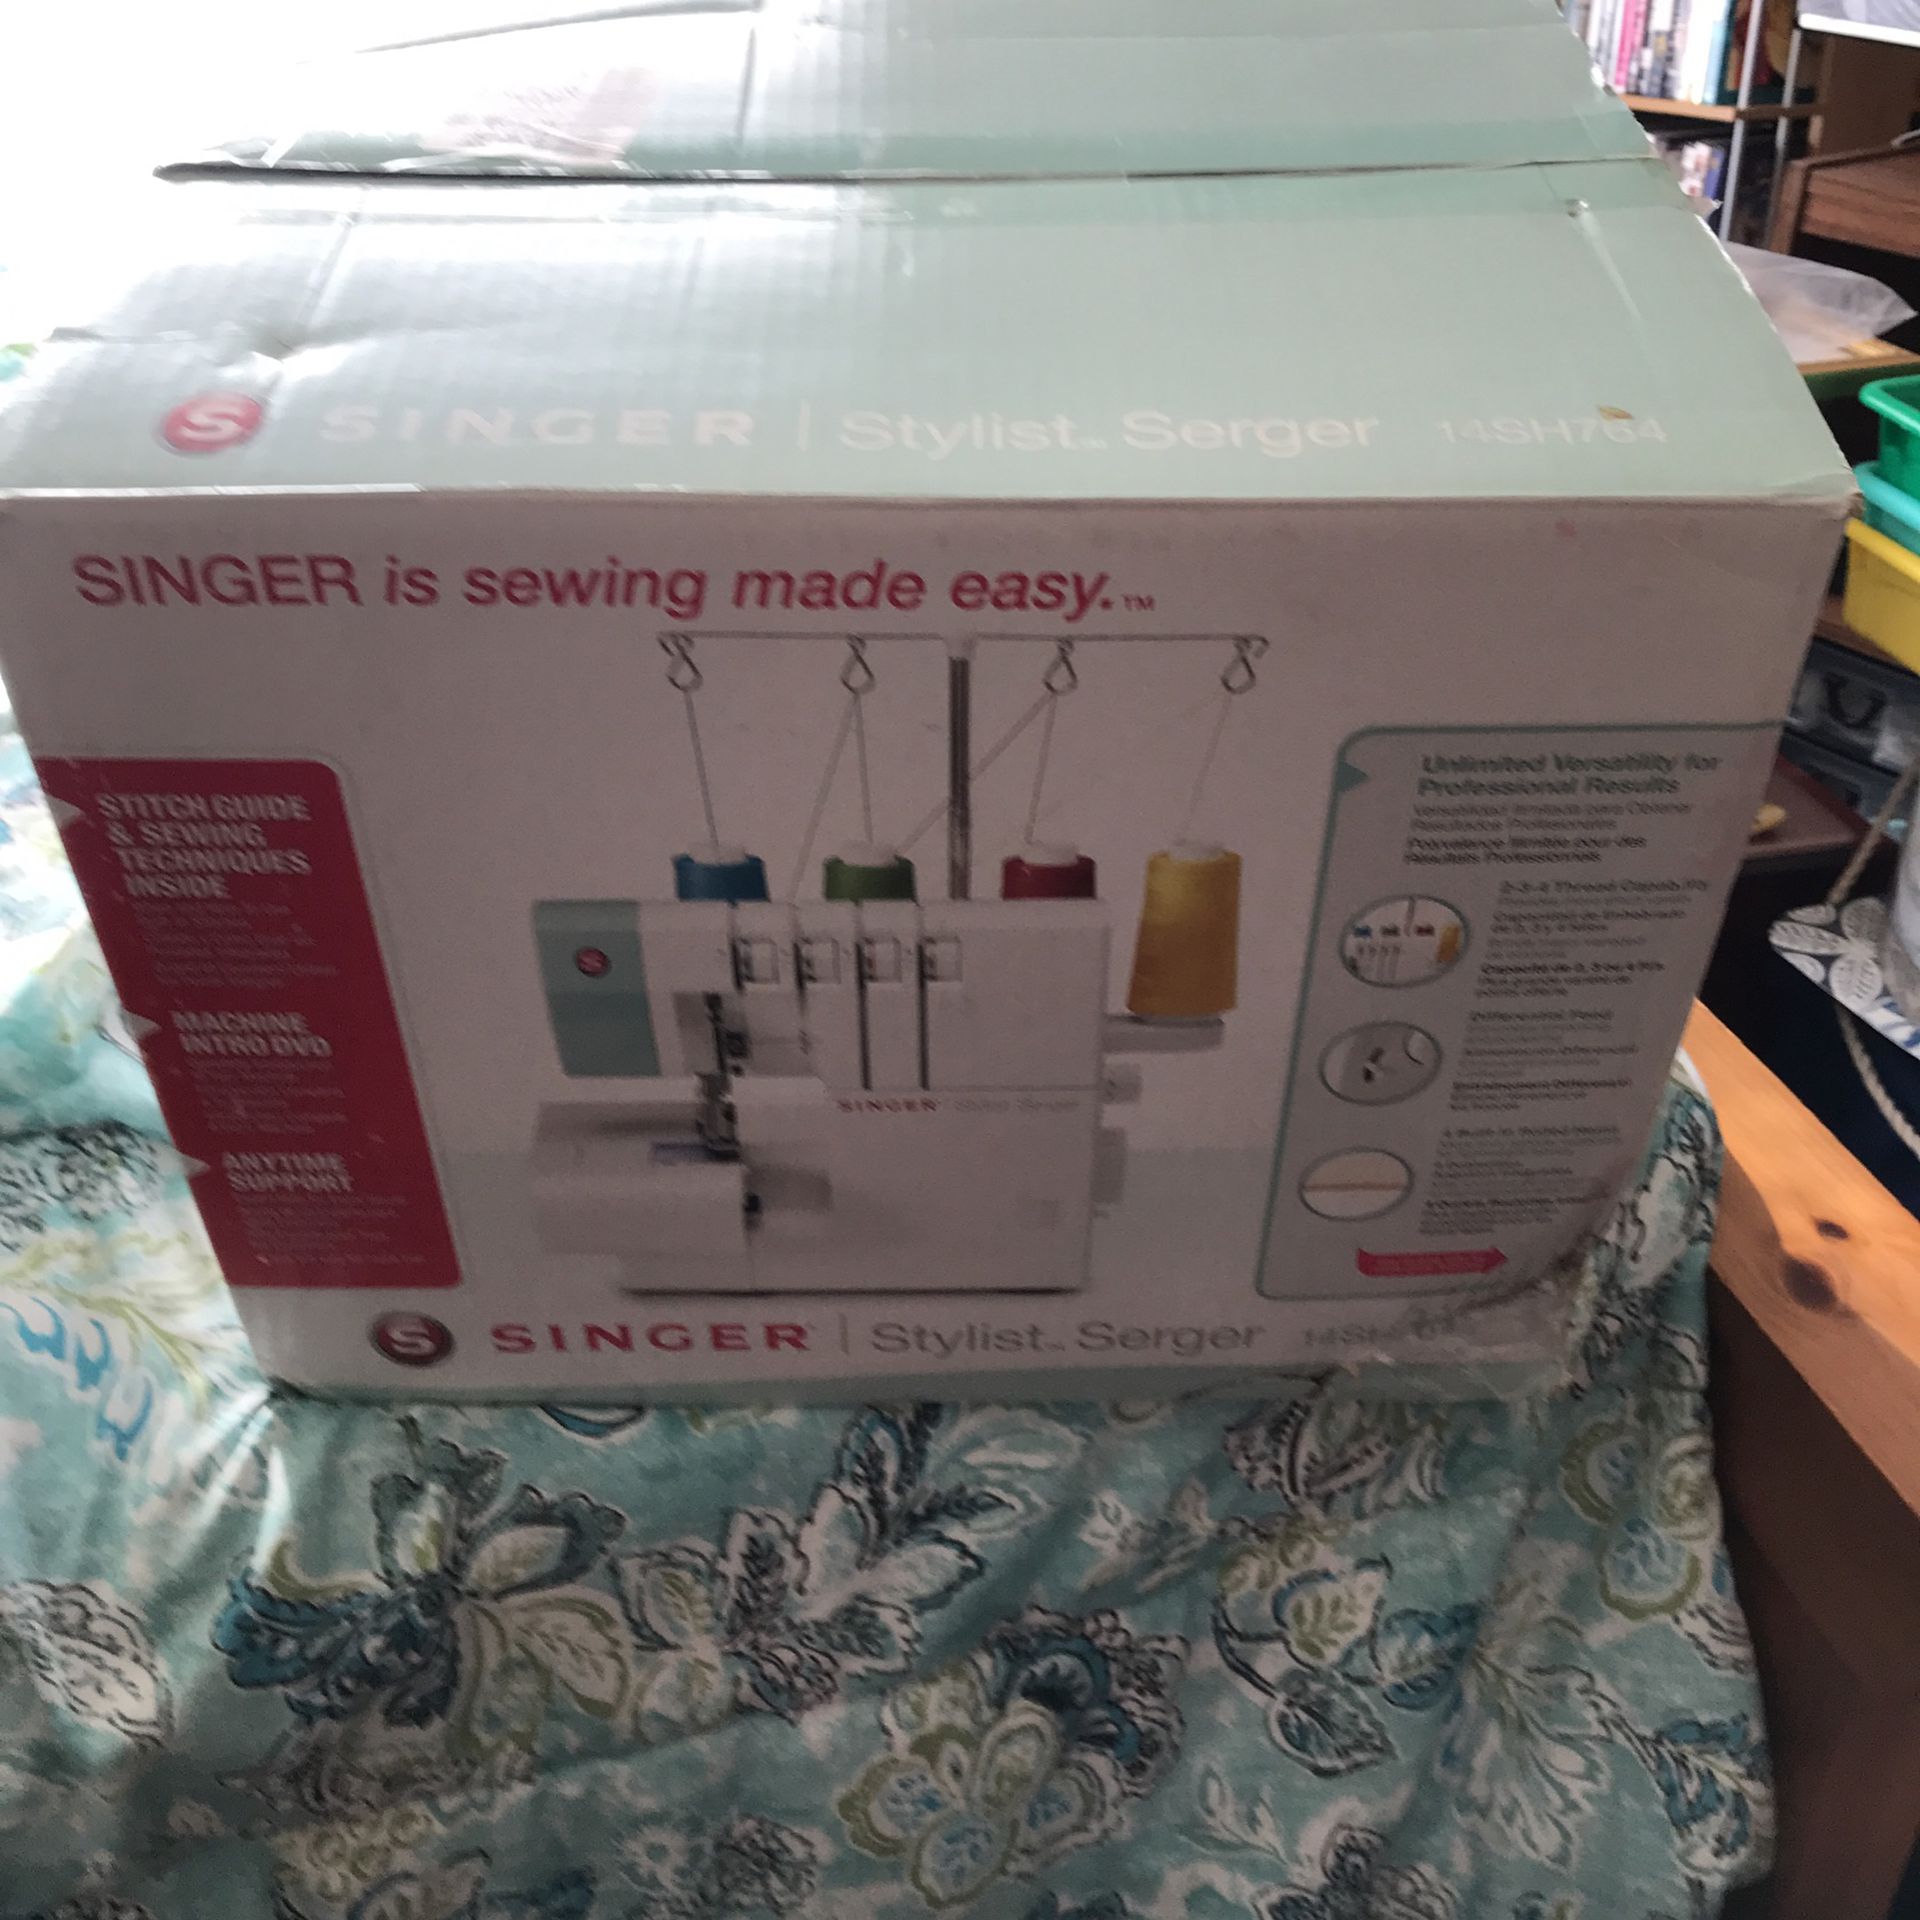 Singer Serger - New, Still In Box And Never Used